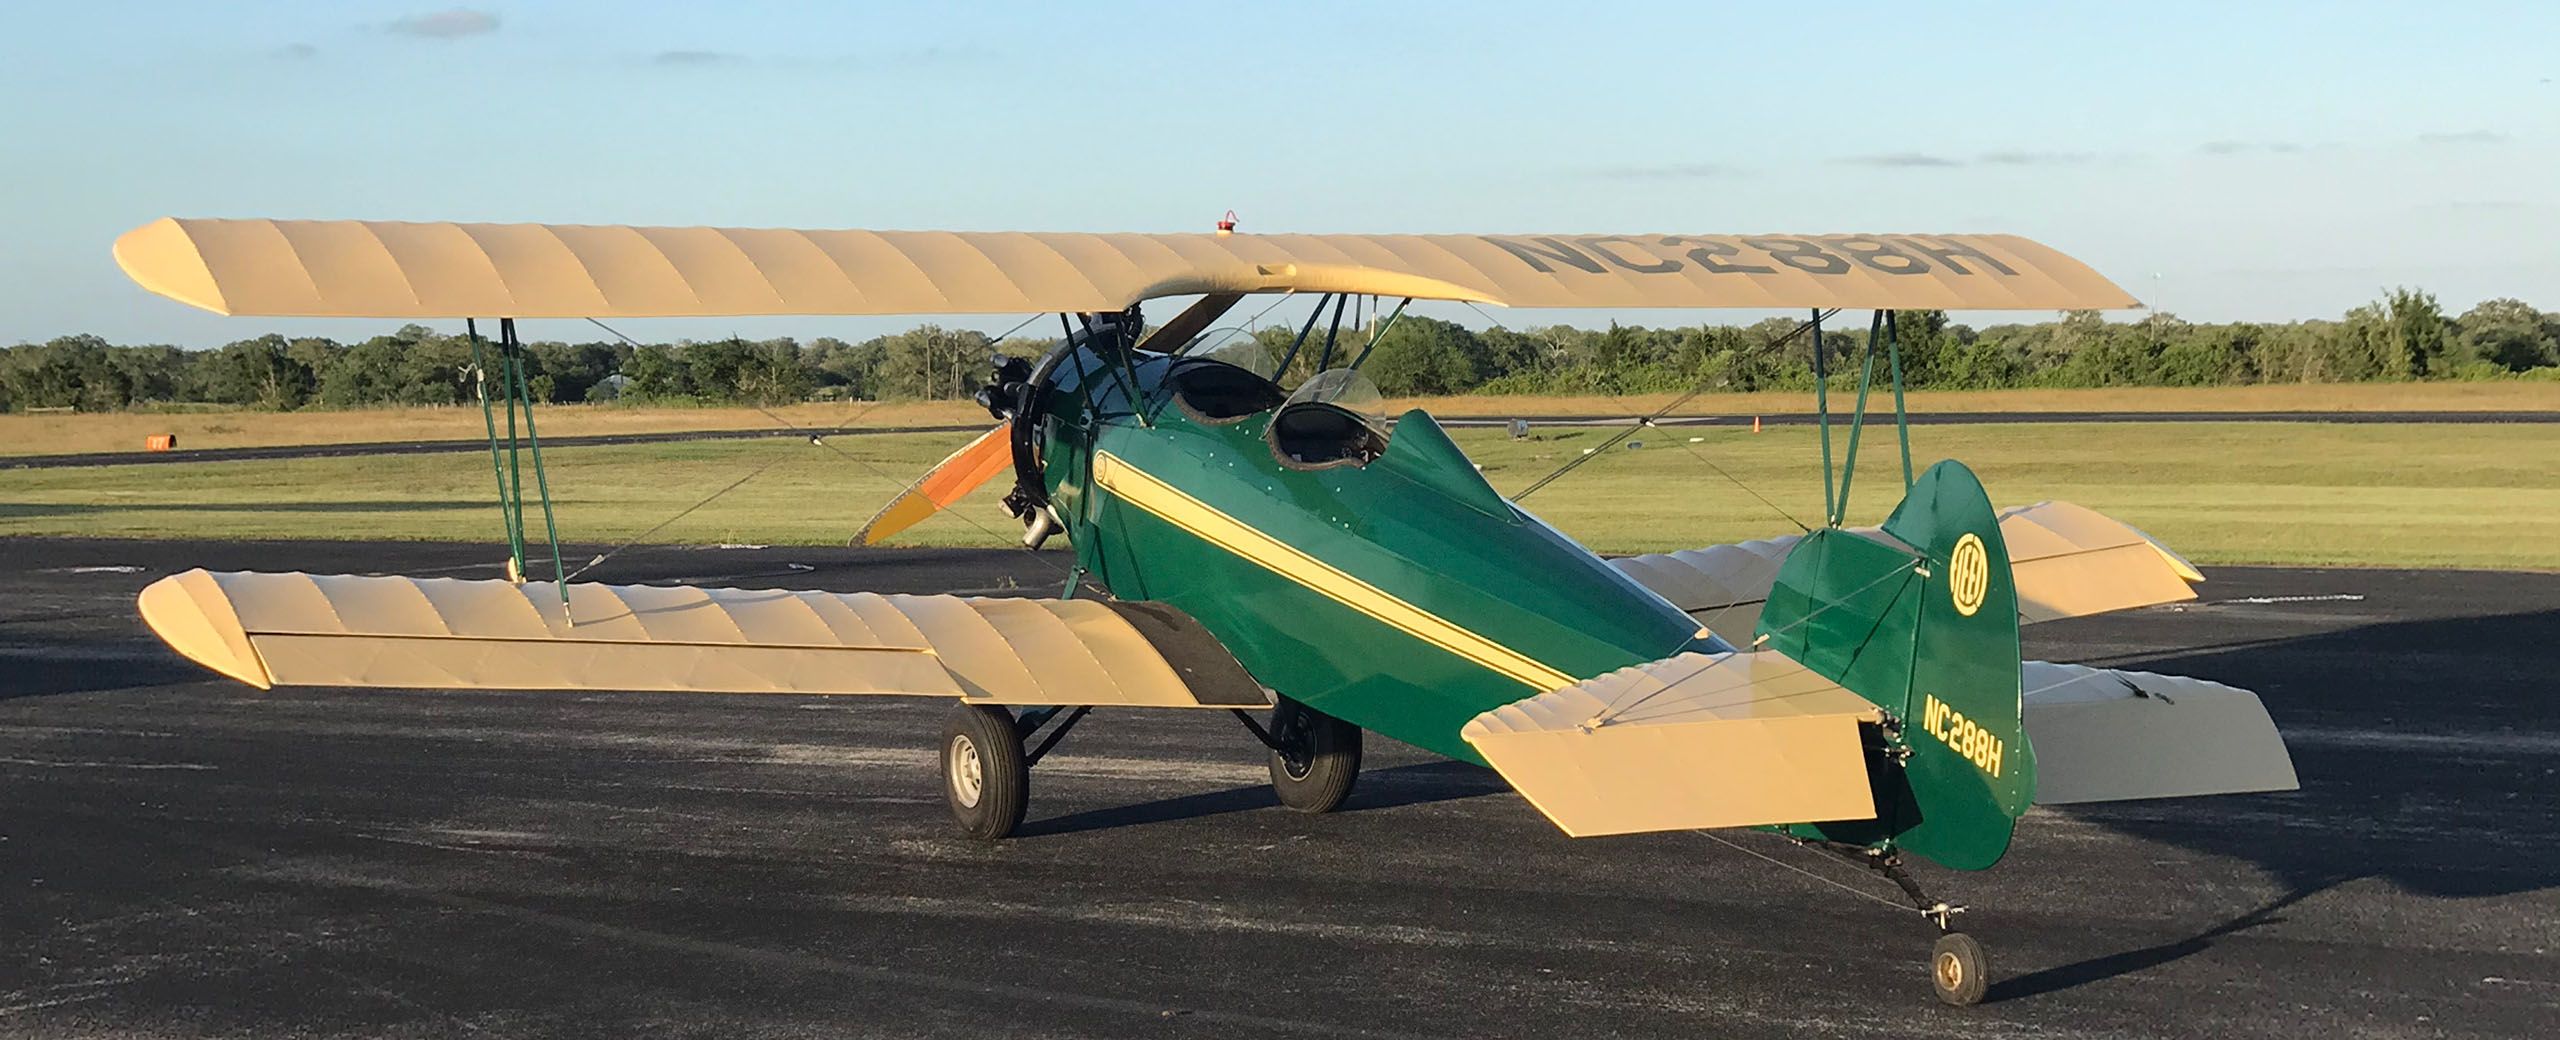 green biplane with tan wings and stripe facing away from the camera in a 3/4 view